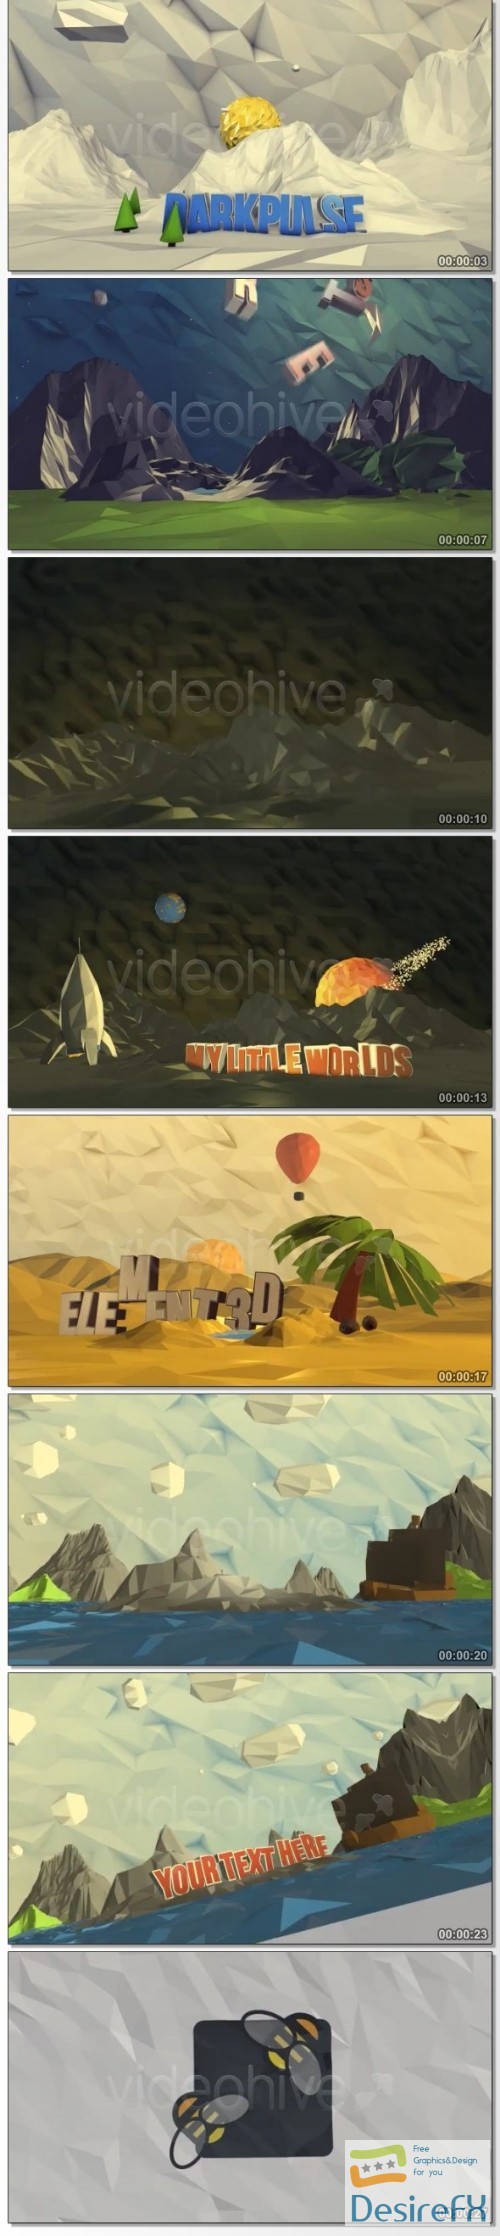 Videohive My Little Worlds 3876040